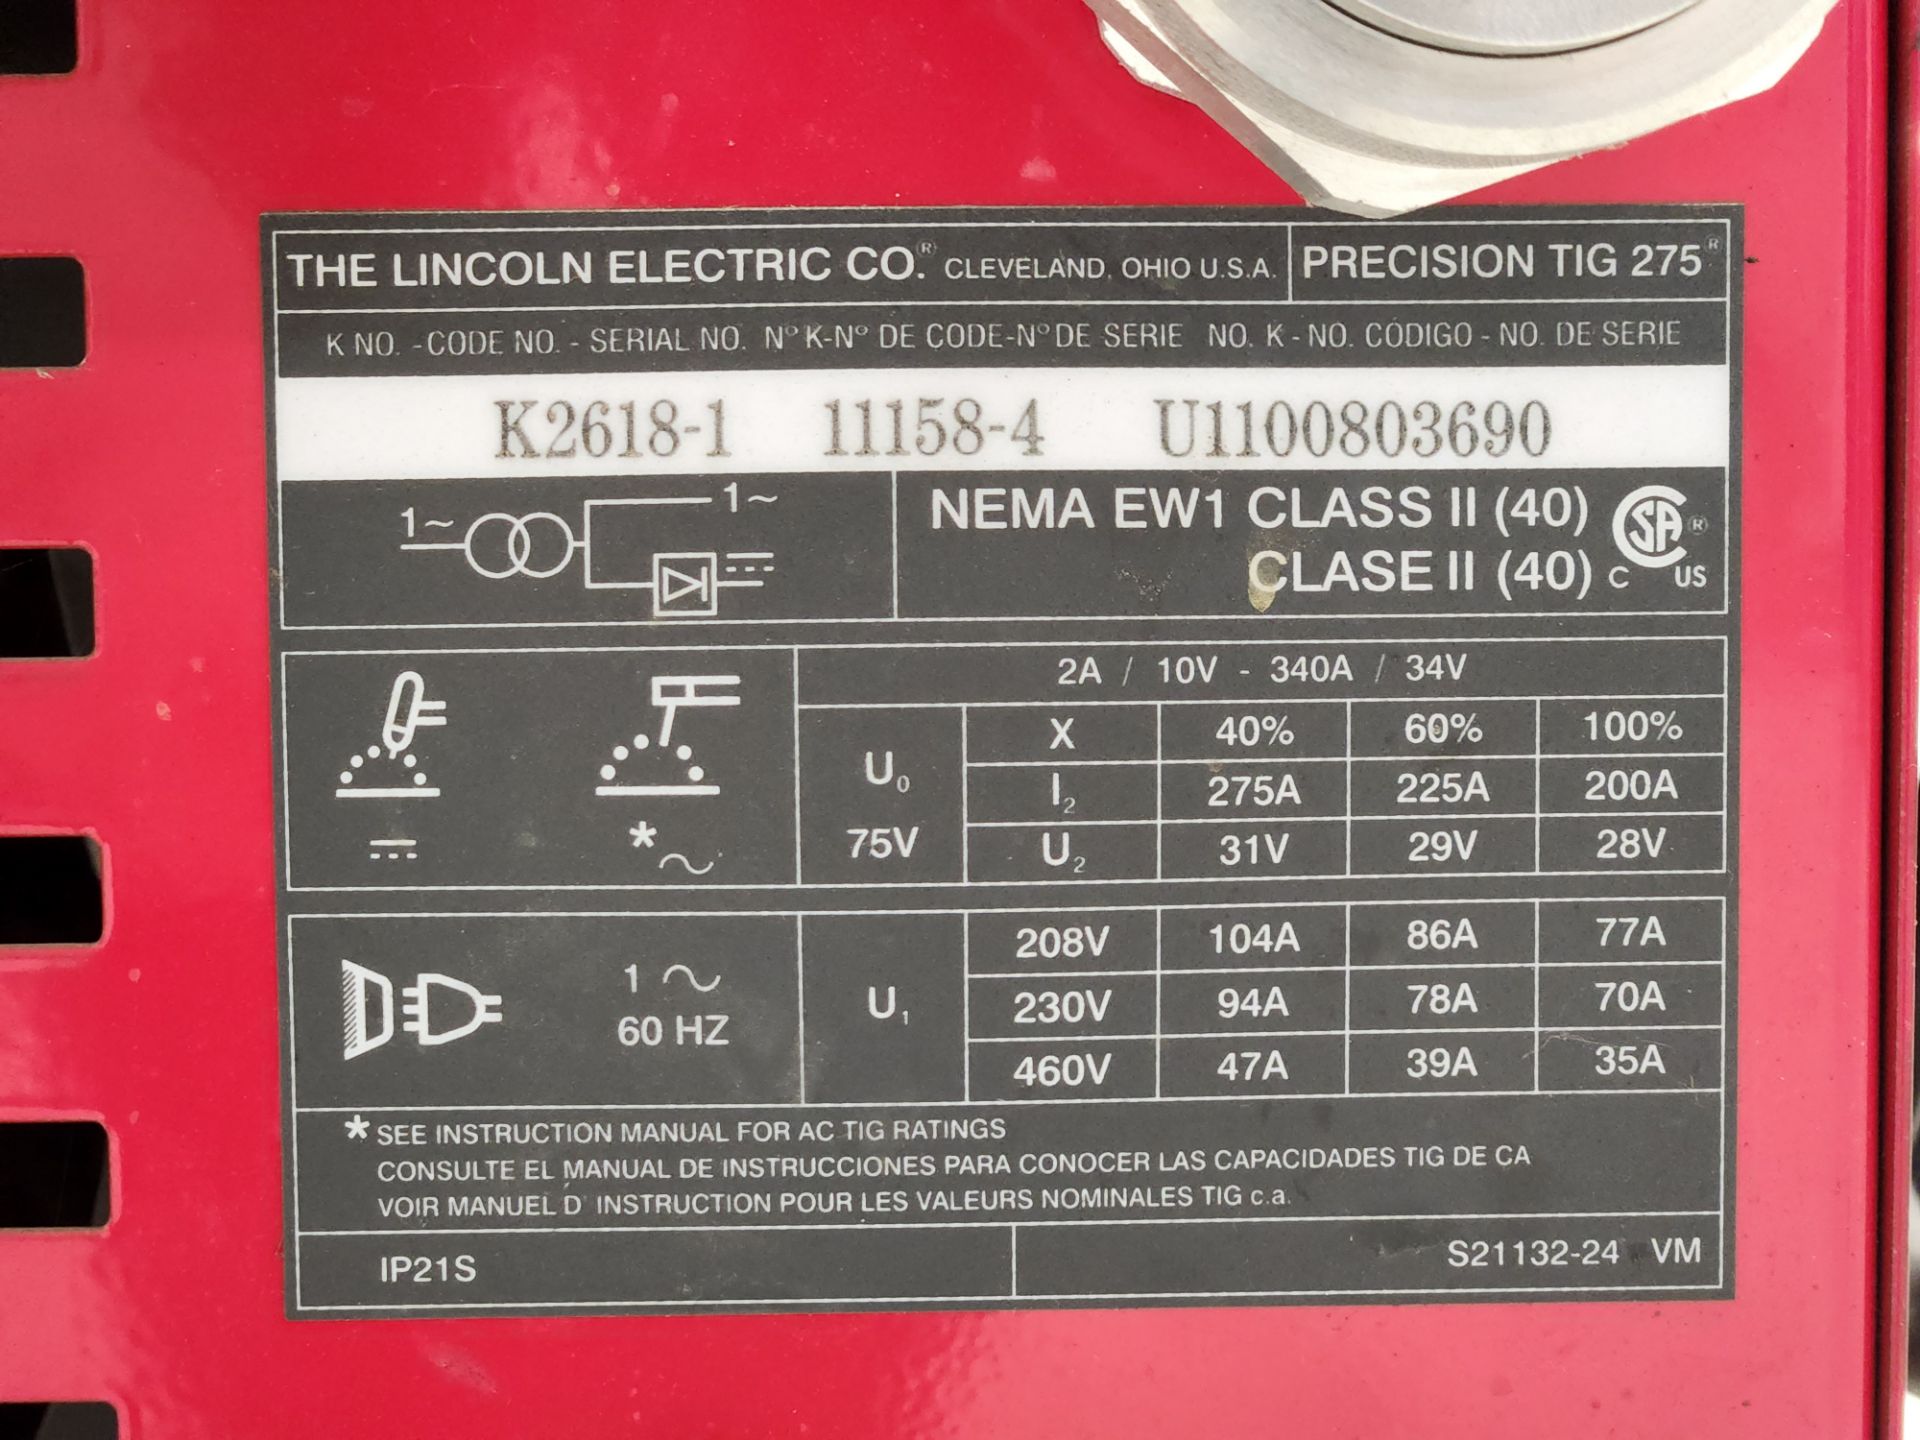 Lincoln Electric 275 Precision TIG Welder - Image 6 of 6